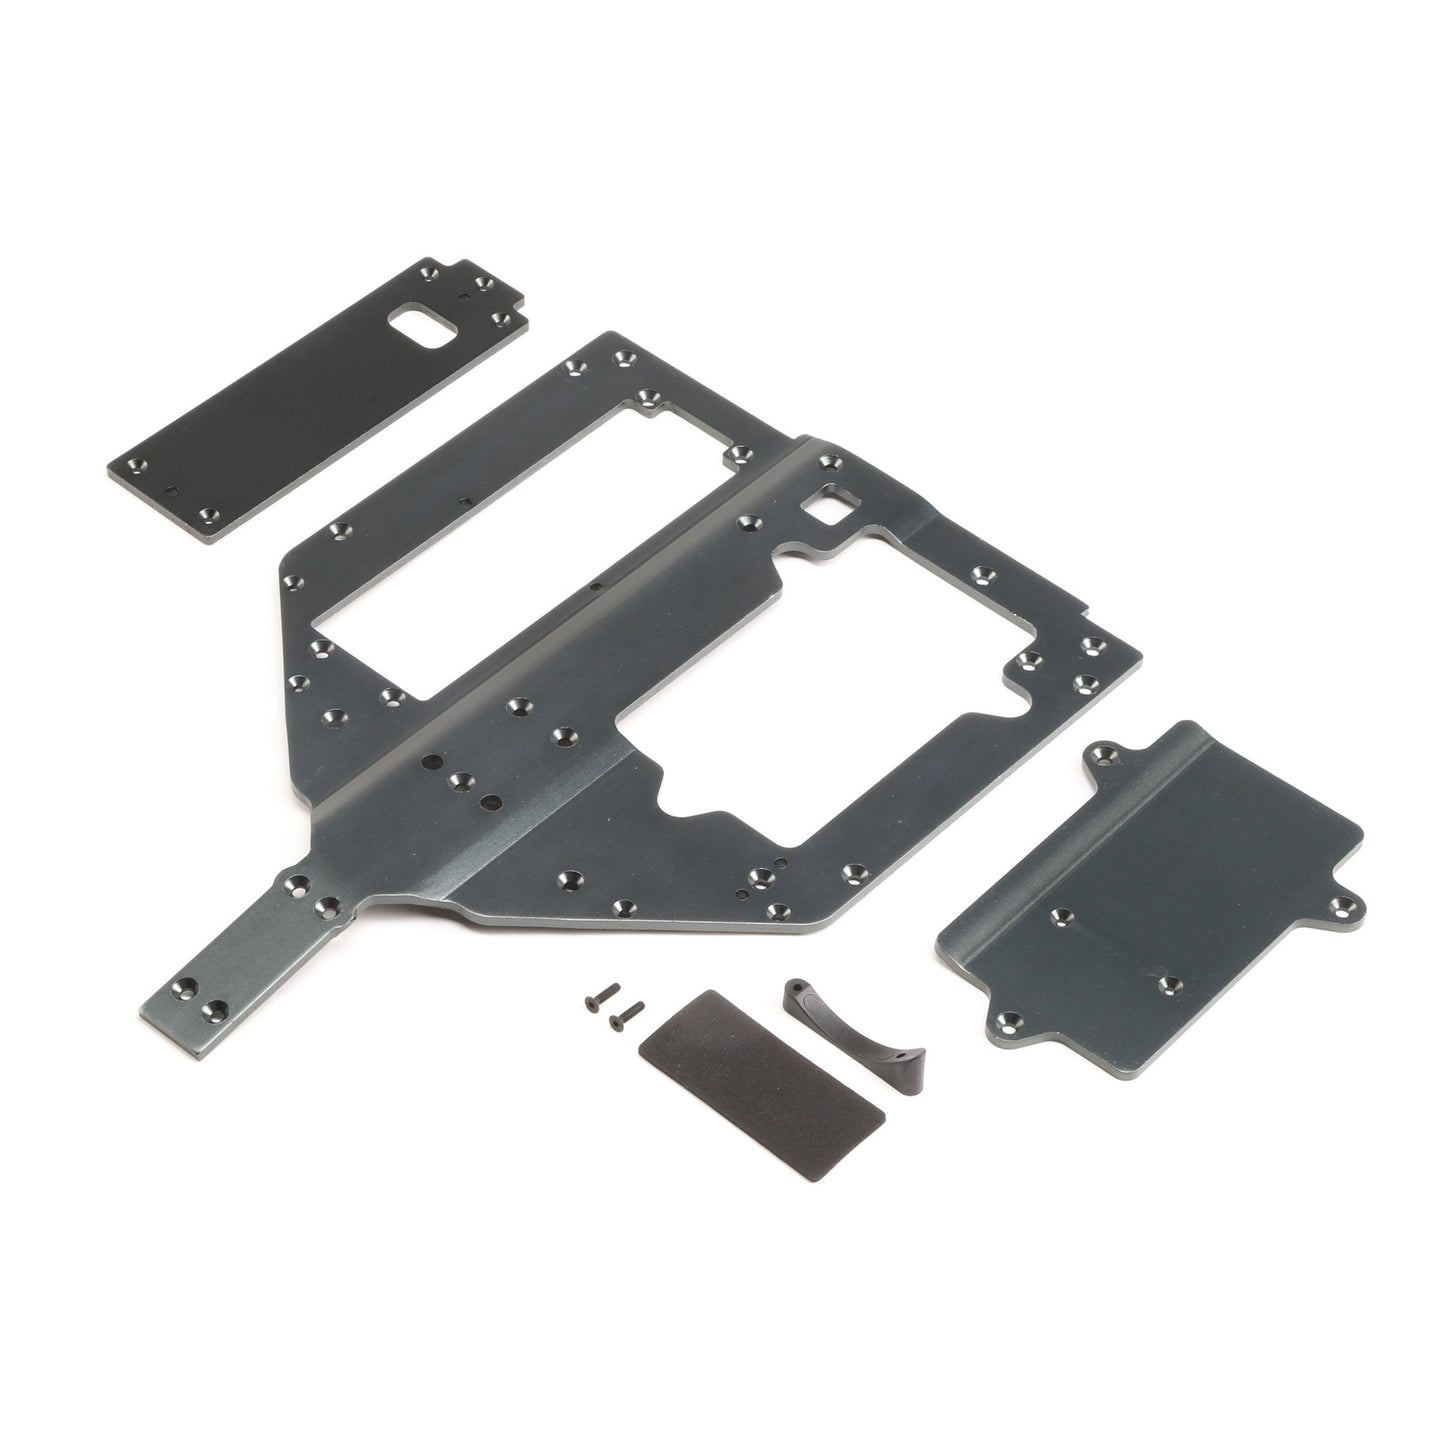 Chassis, Motor & Battery Cover